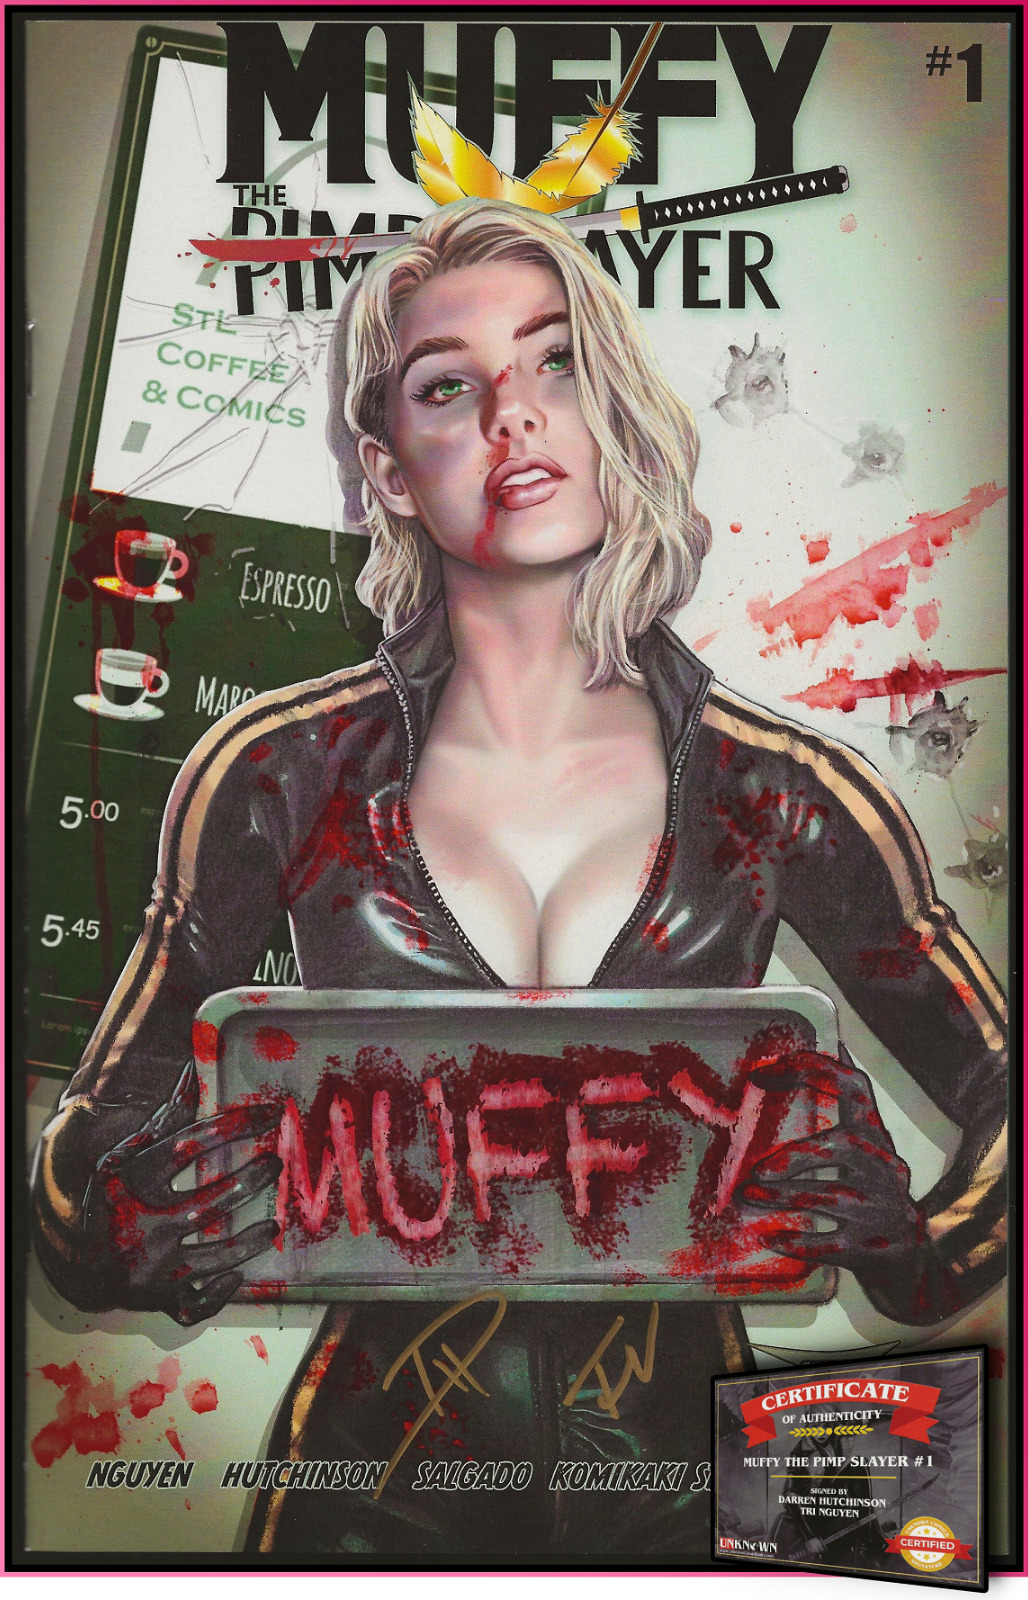 MUFFY THE PIMP SLAYER #1 (2021) LEARY CATWOMAN HOMAGE VARIANT 2X SIGNED COA NM+